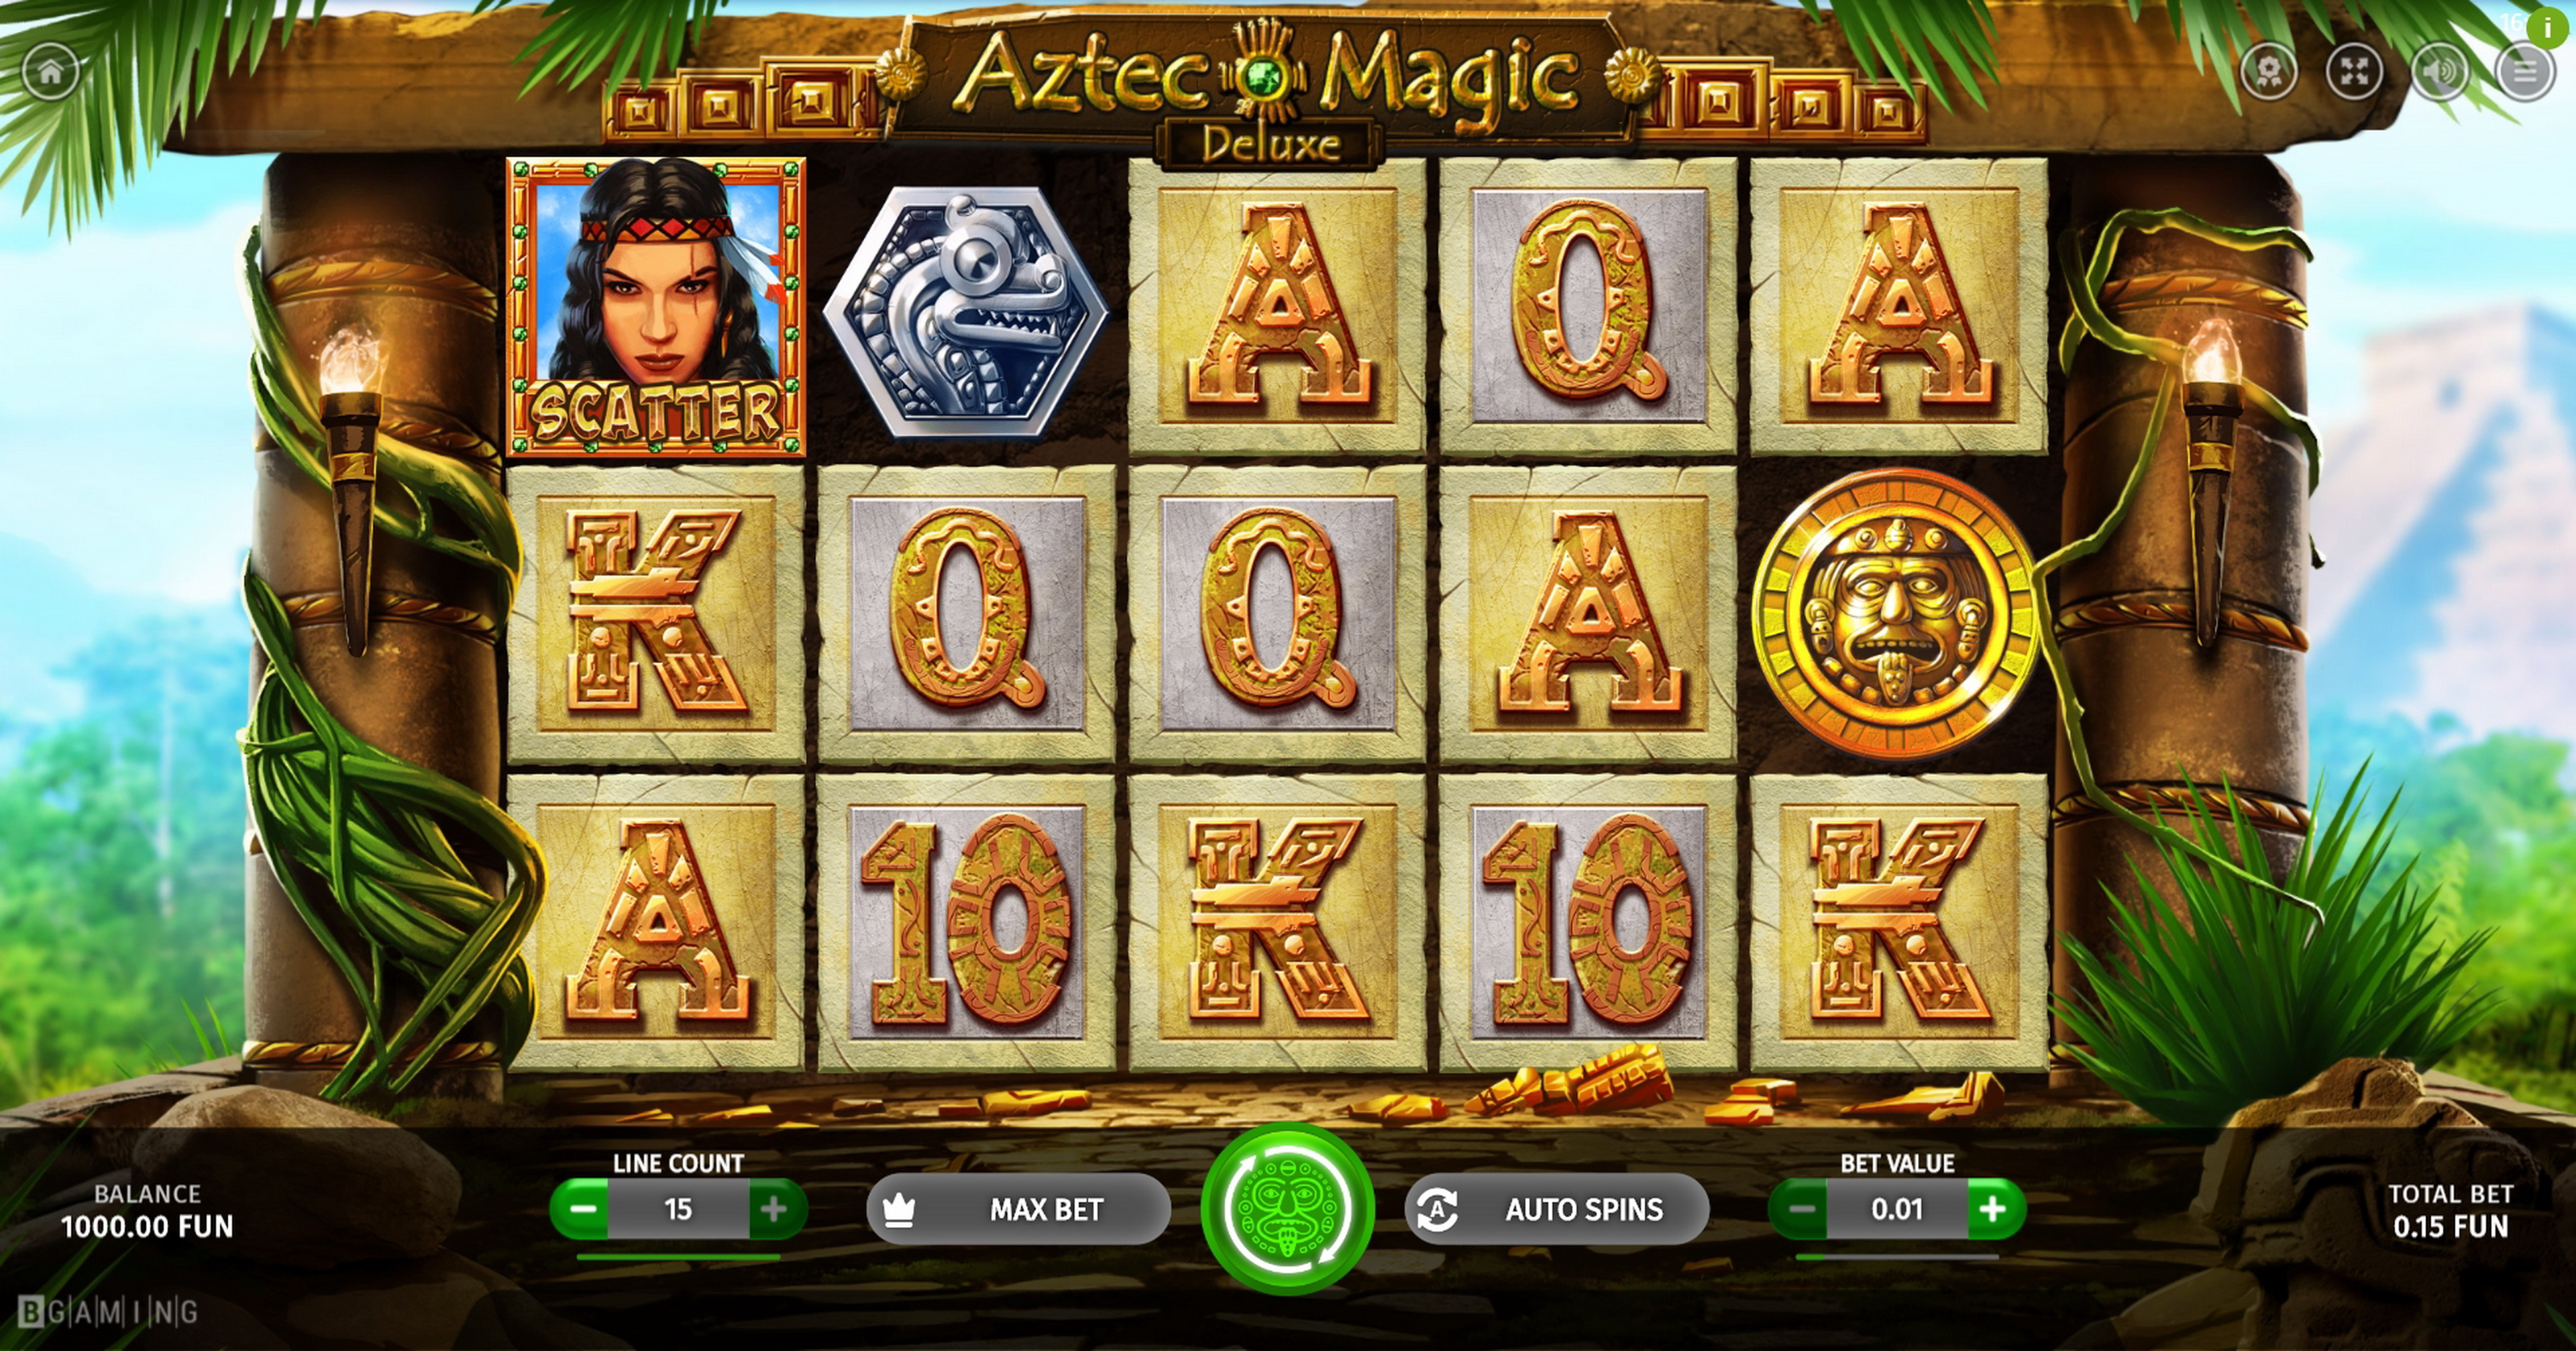 Aztec Magic Deluxe by BGaming - SiGMA Play